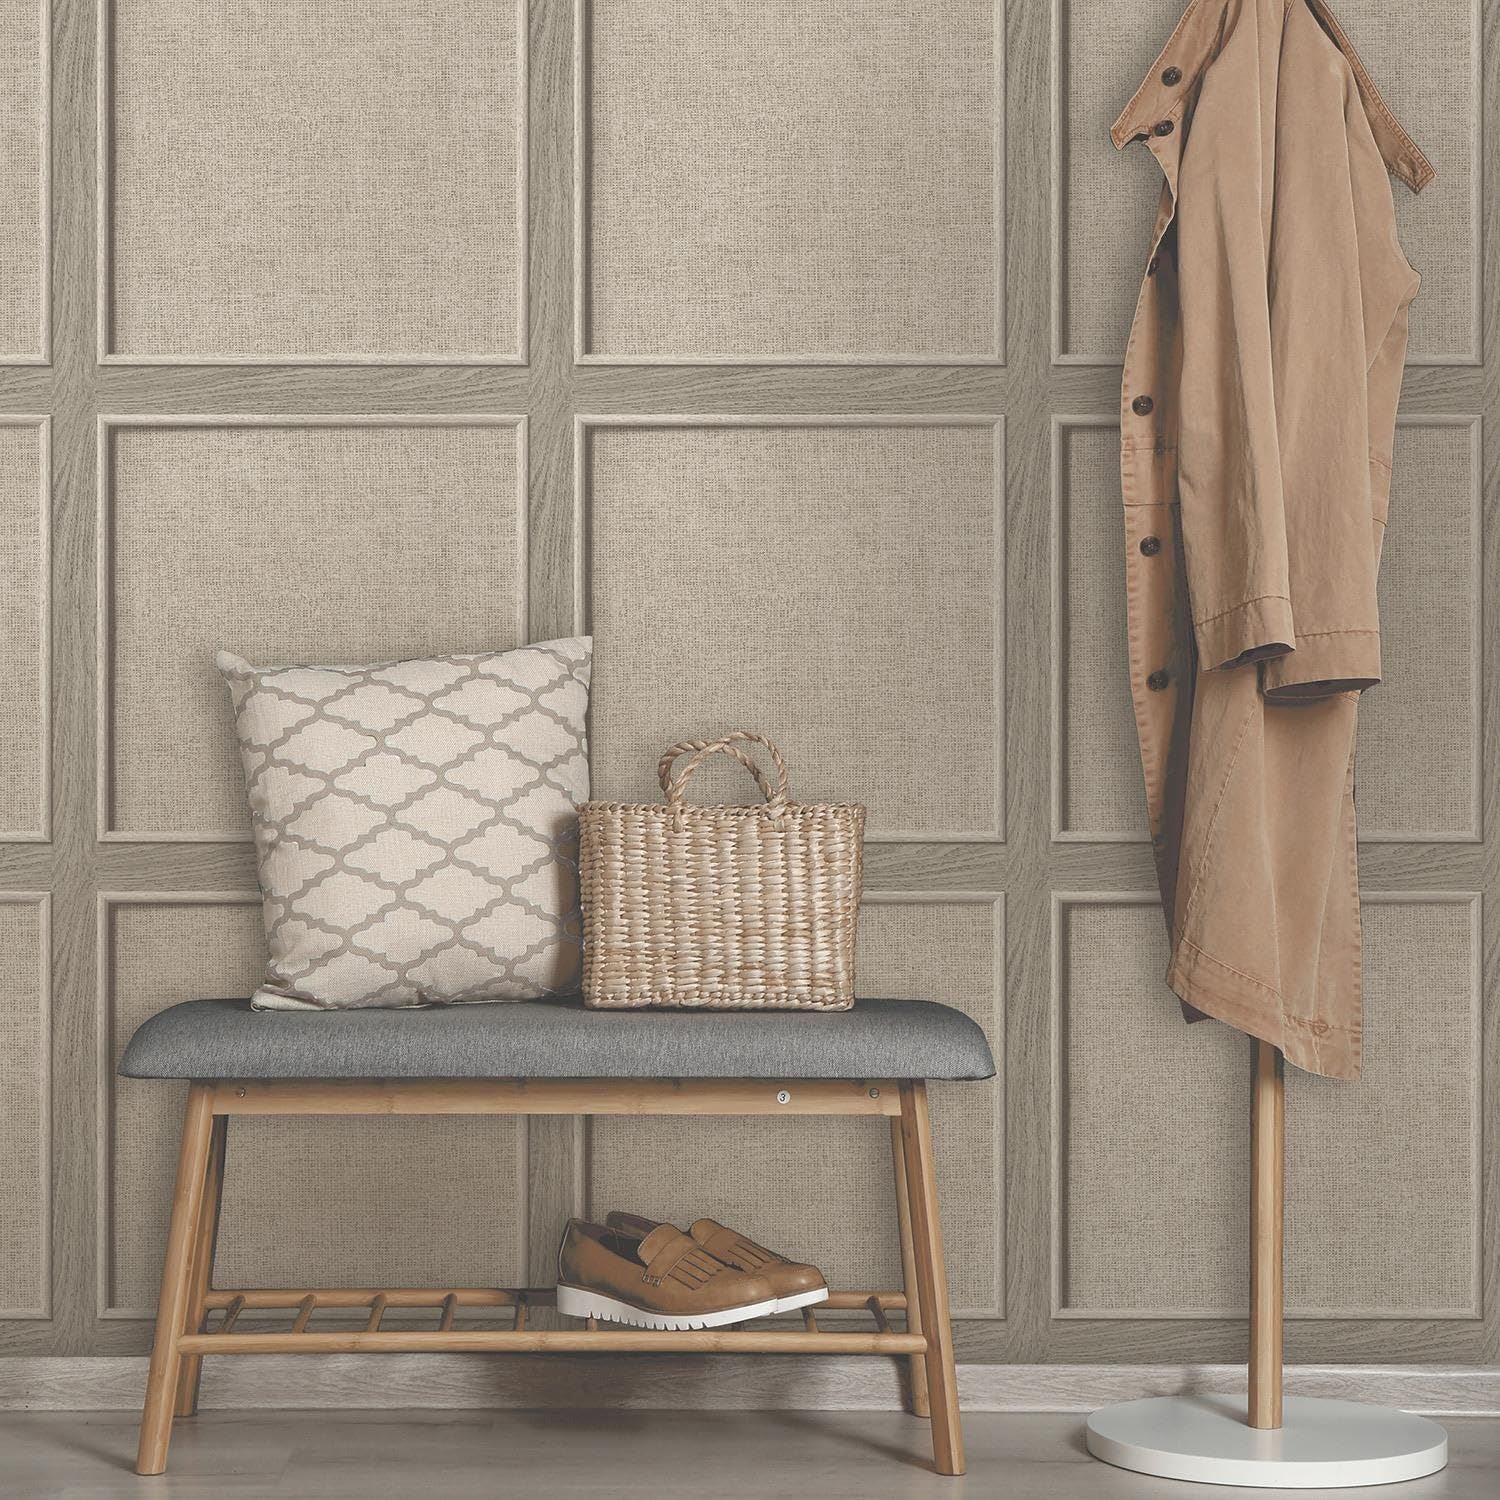 Rasch Bevelled Birch Wood Panelled Weave Grain Wallpaper - Carved Trendy Modern Contemporary Feature Wall